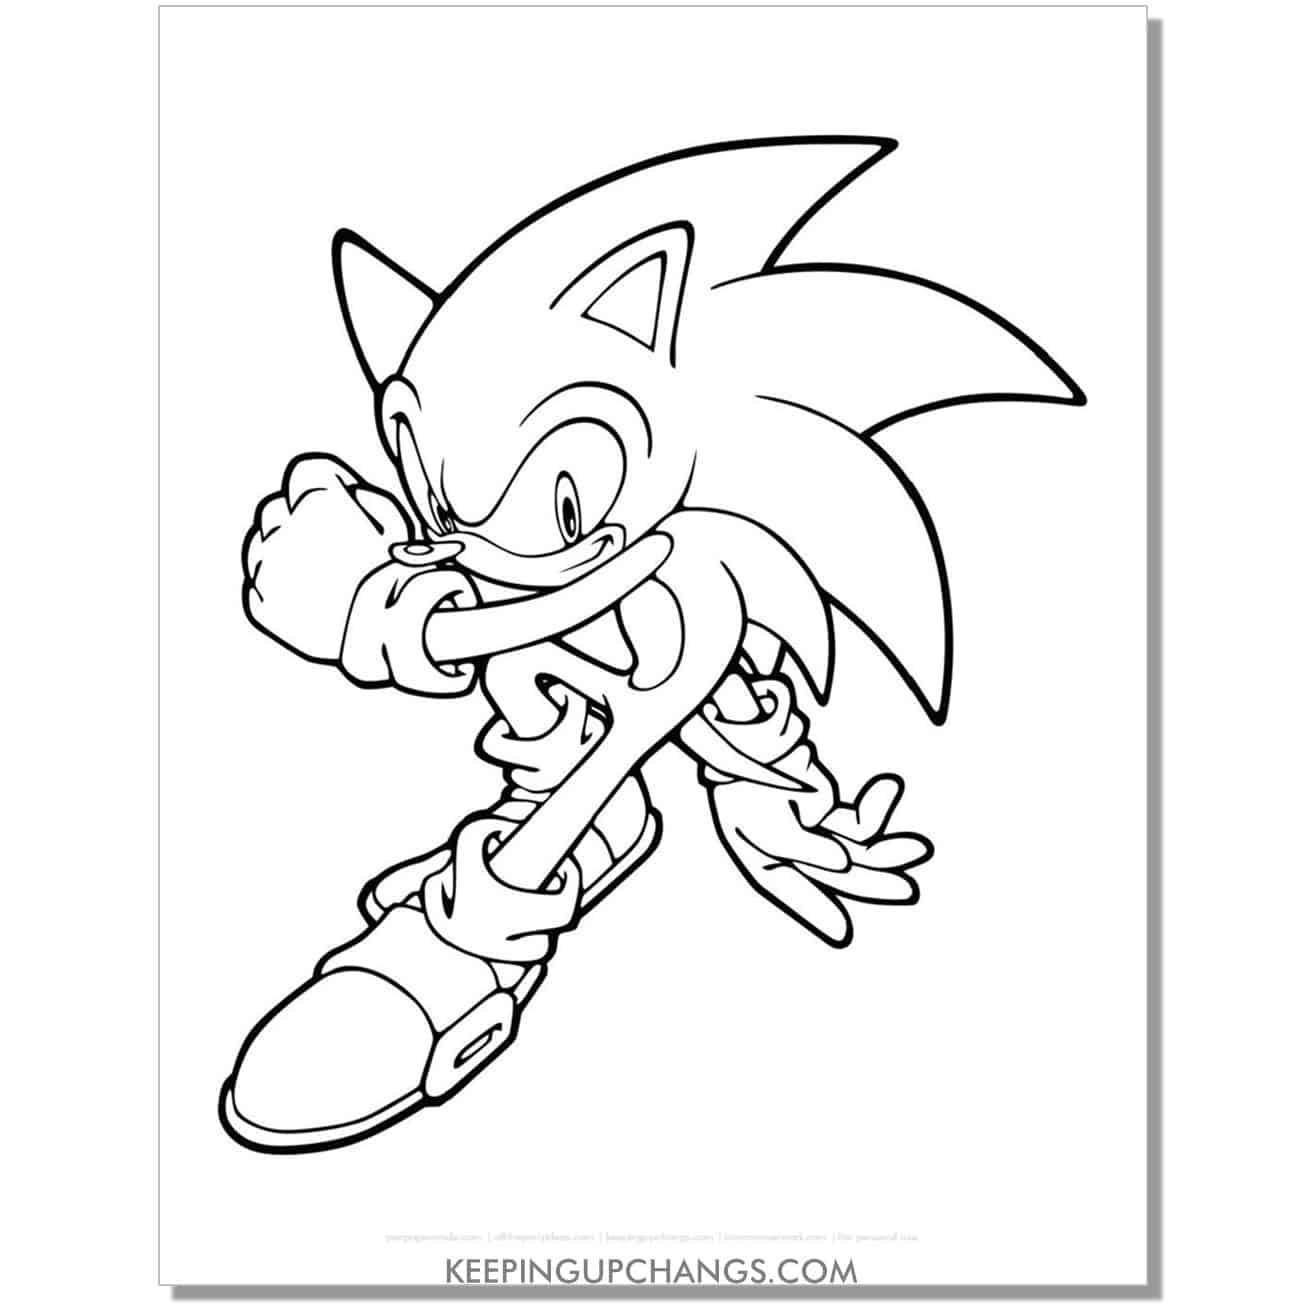 sonic crouching with one arm across body coloring page.